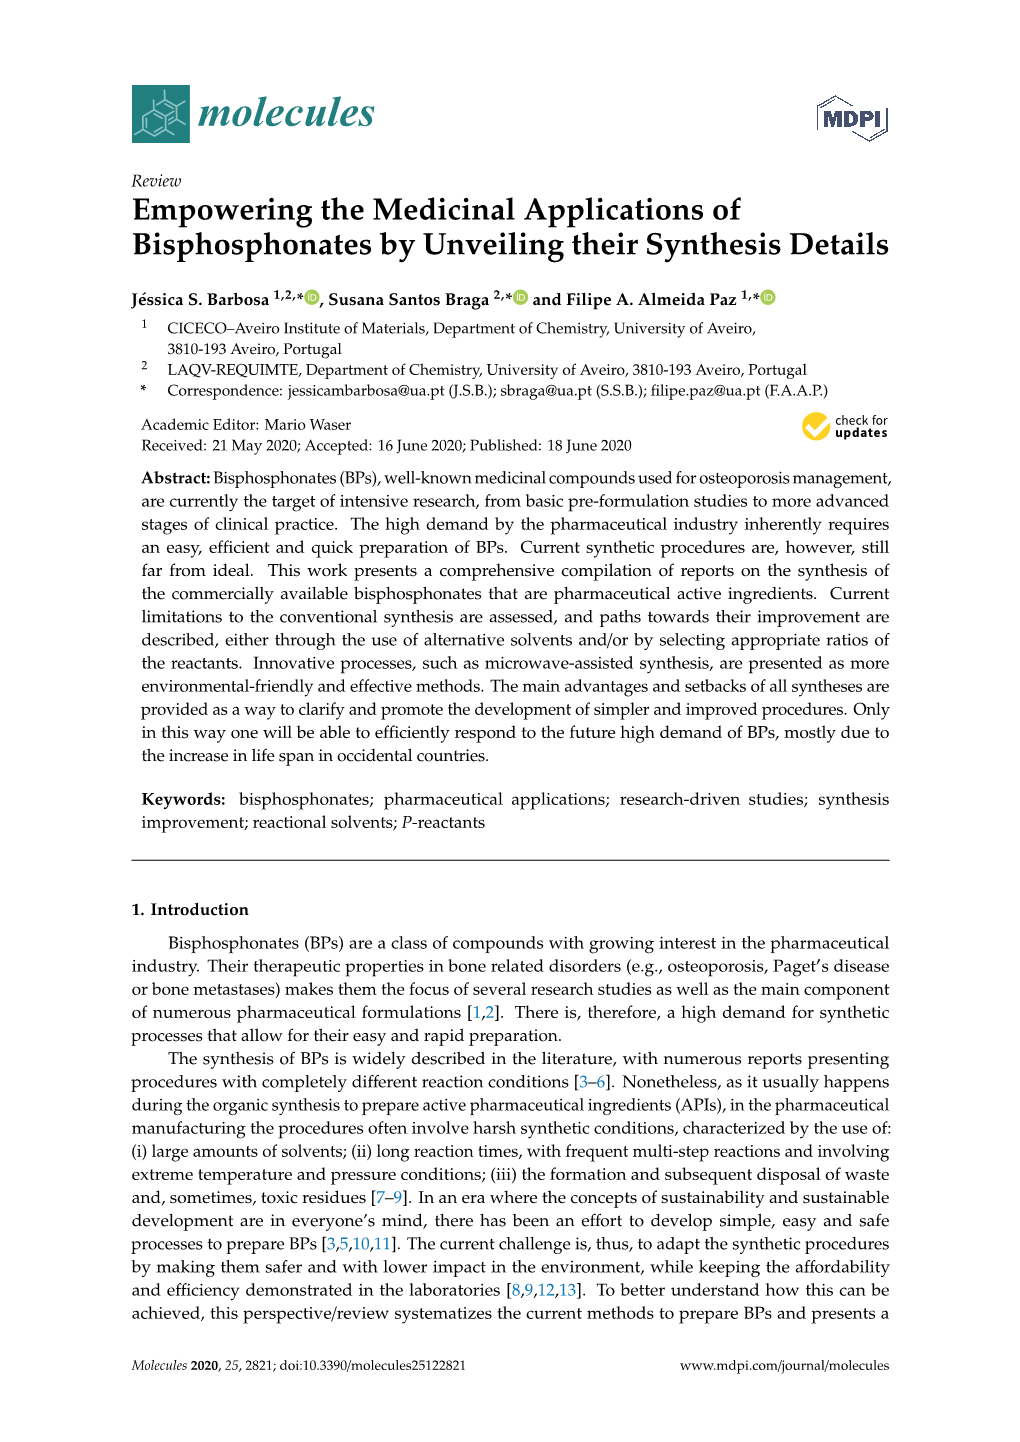 Empowering the Medicinal Applications of Bisphosphonates by Unveiling Their Synthesis Details